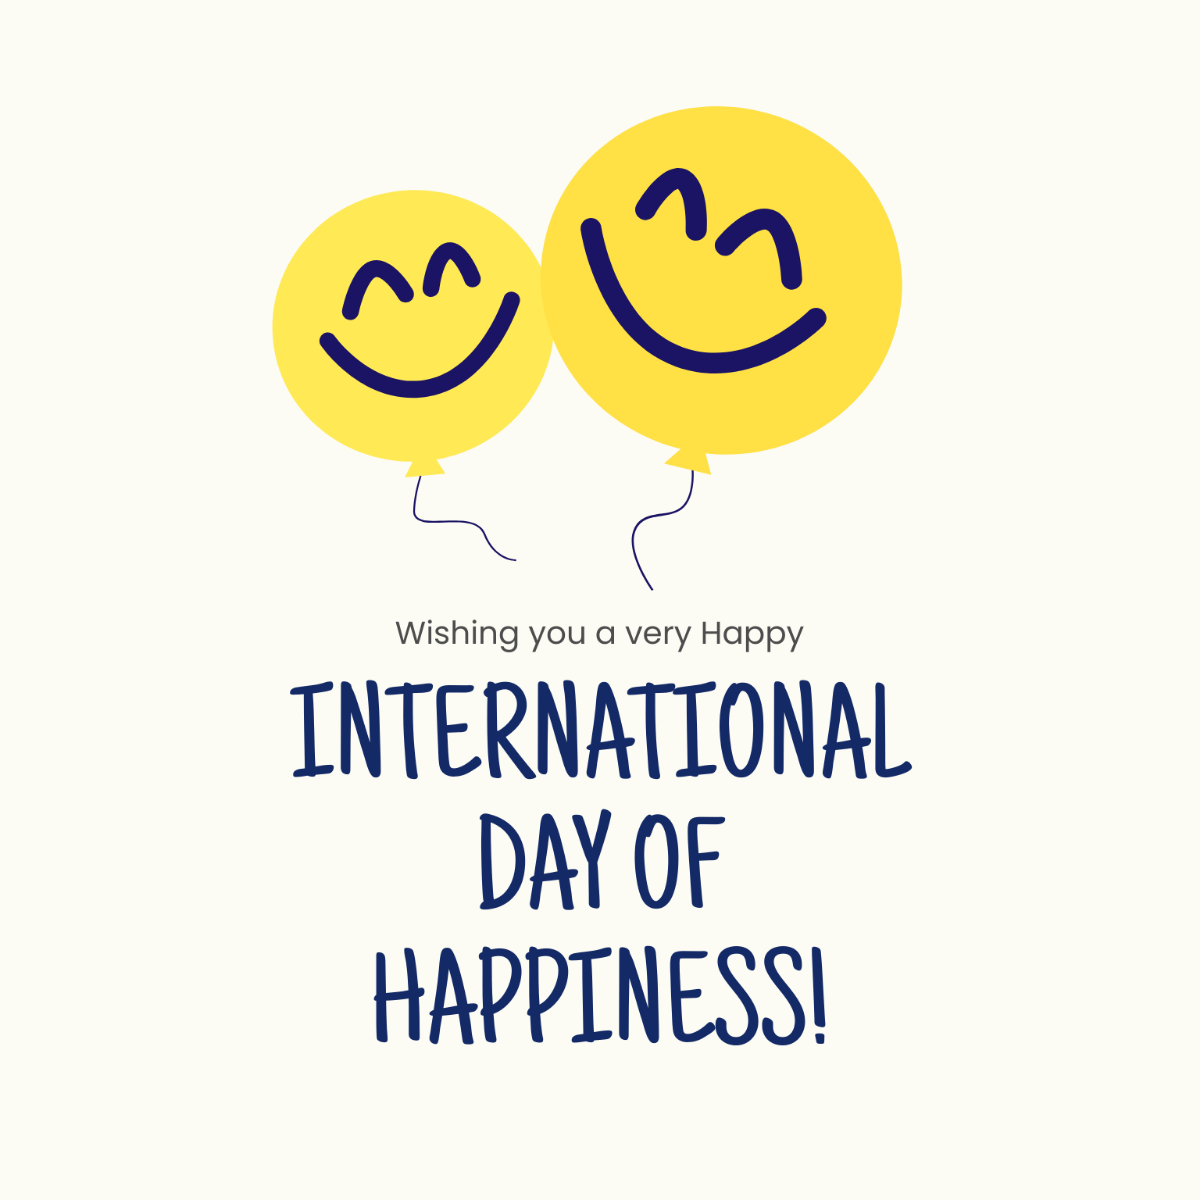 International Day of Happiness Wishes Vector Template